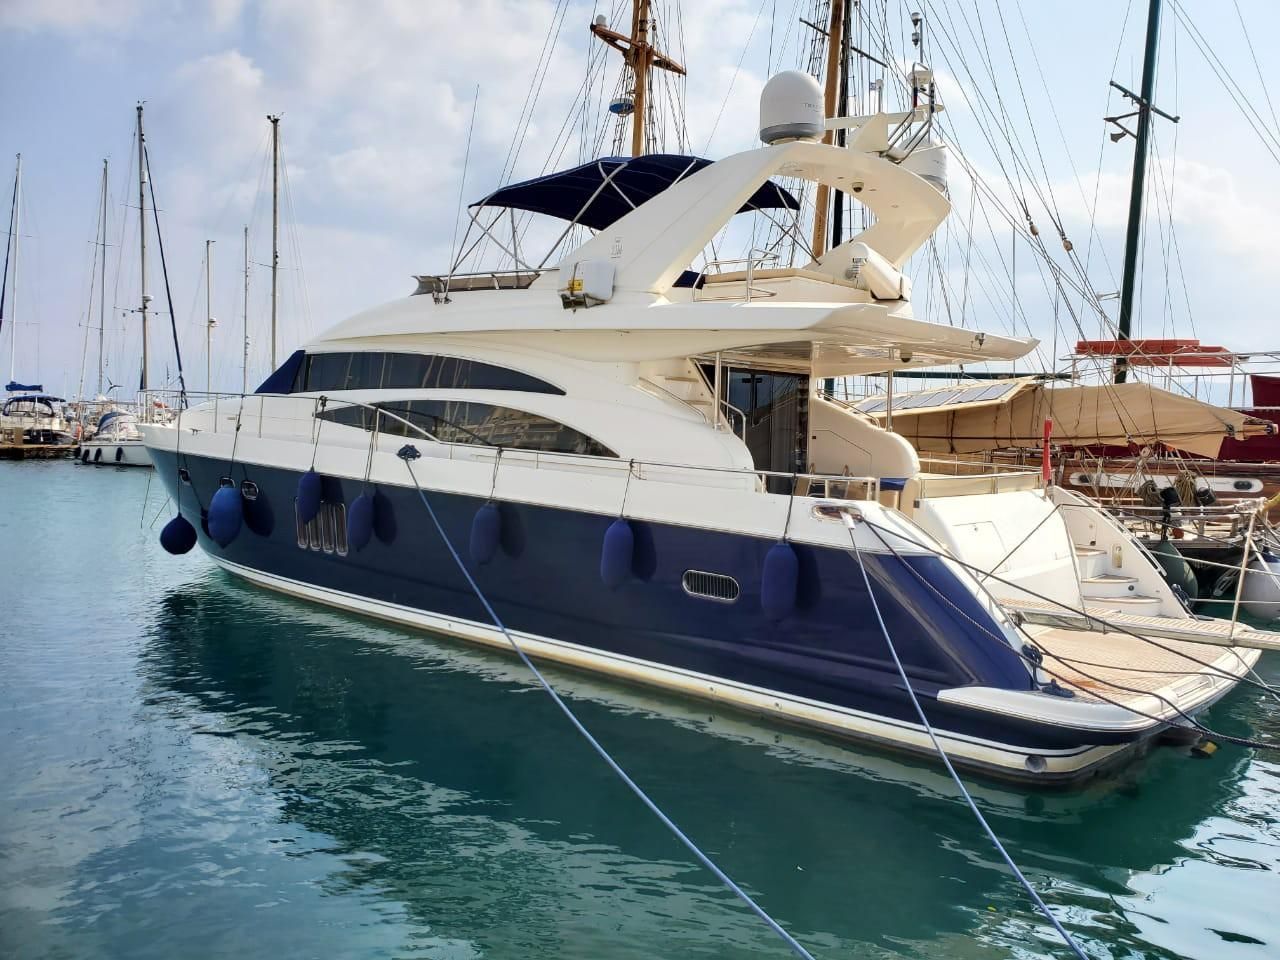 21m yachts for sale